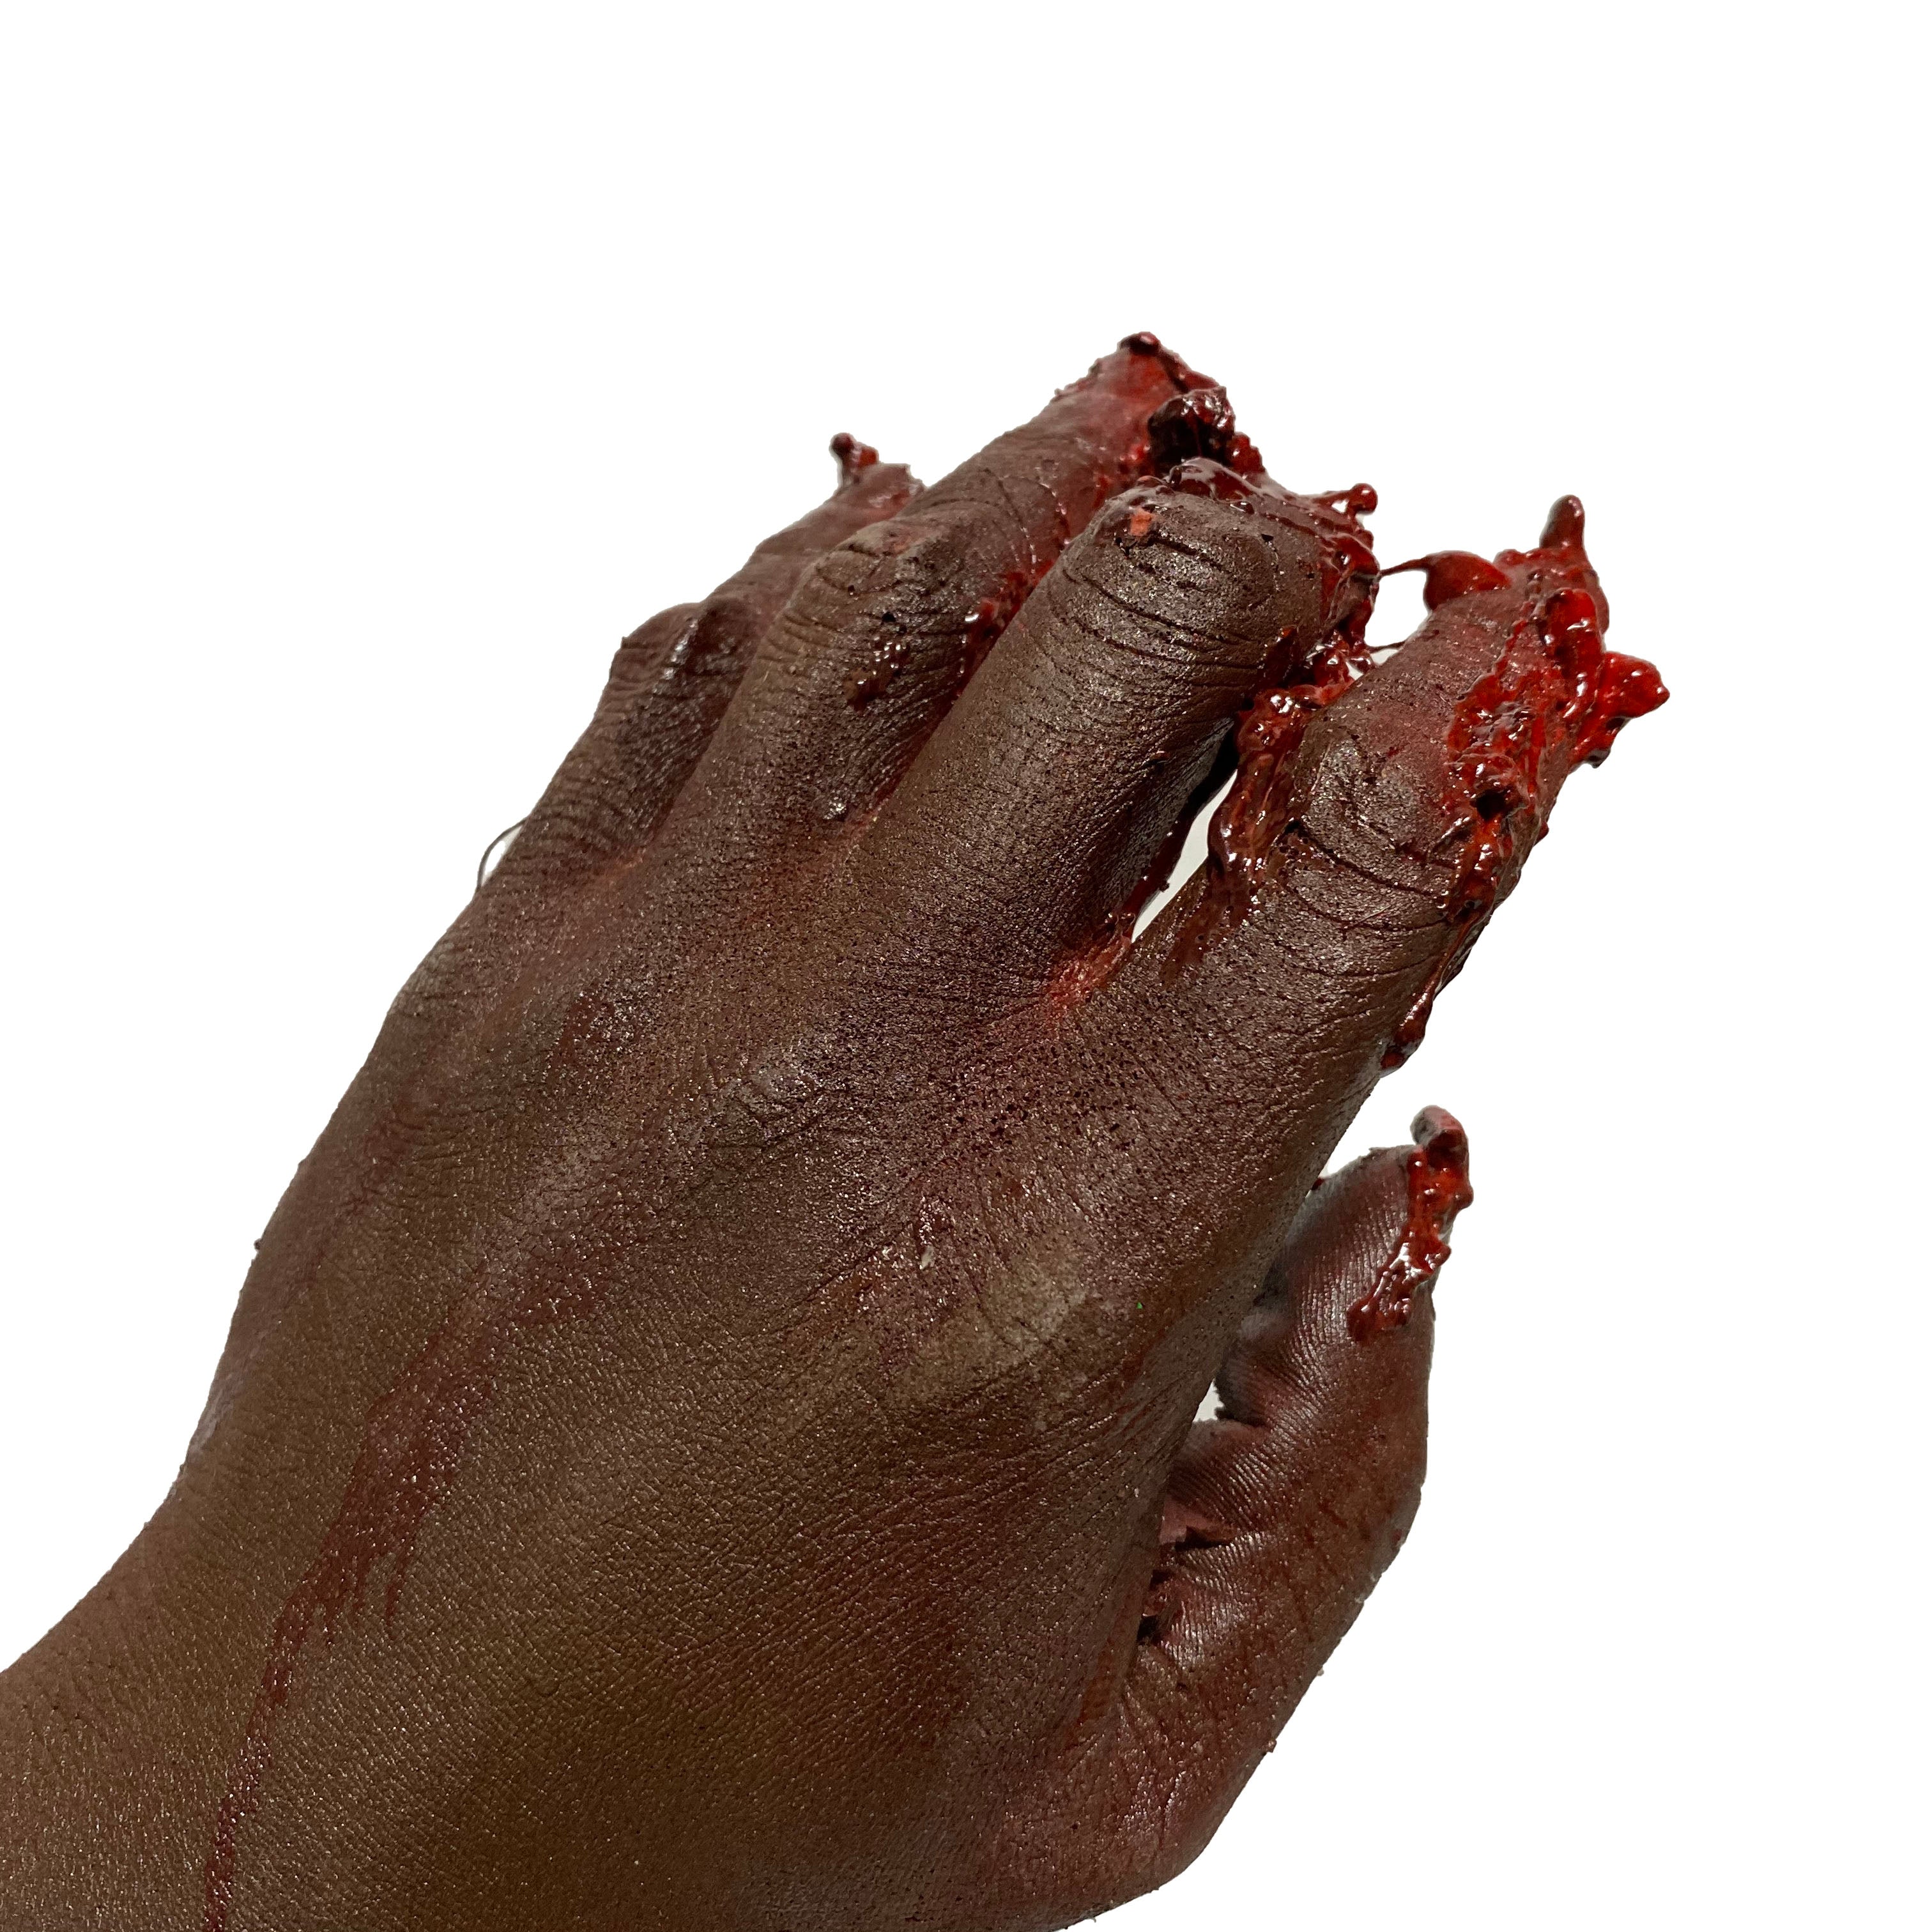 Bloody Freshly Severed Arm - Rubber with Realistic Gore Effects - Dark